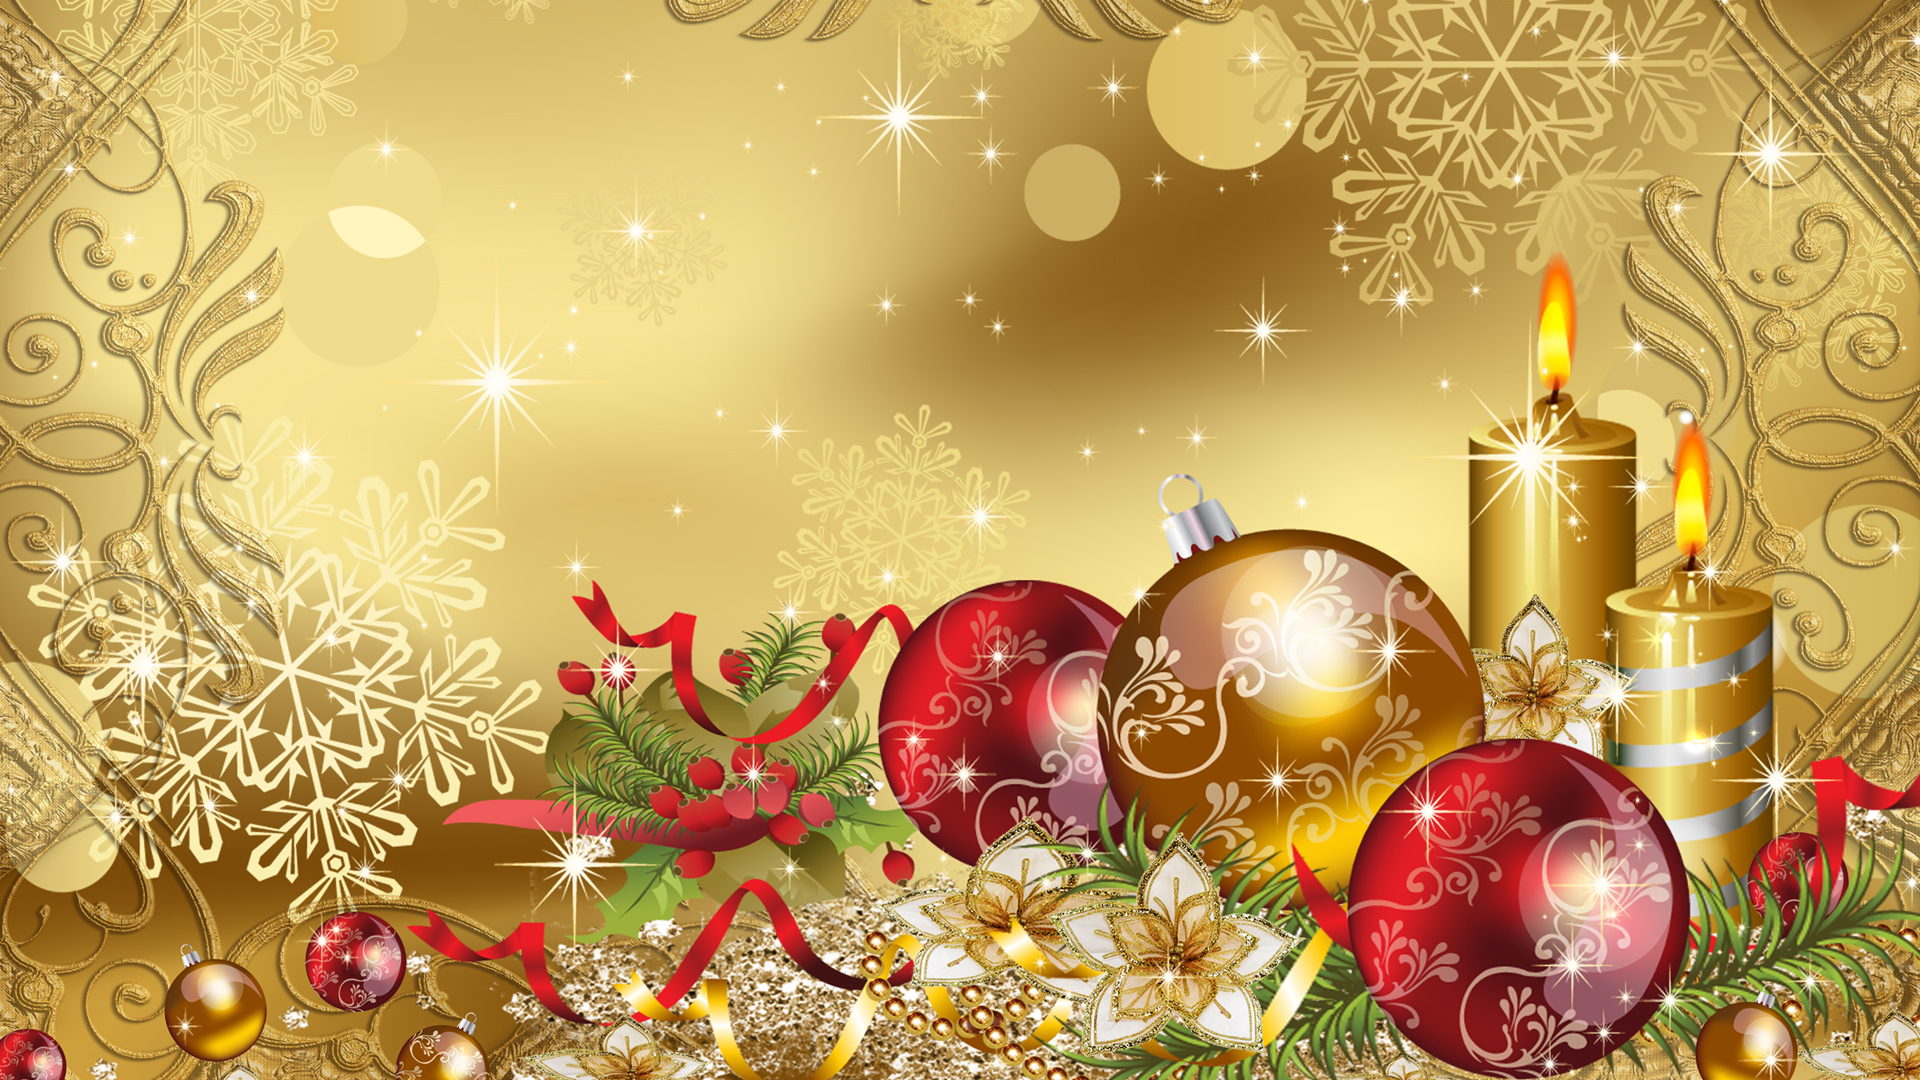 Beautiful Christmas Pictures Wallpaper Background